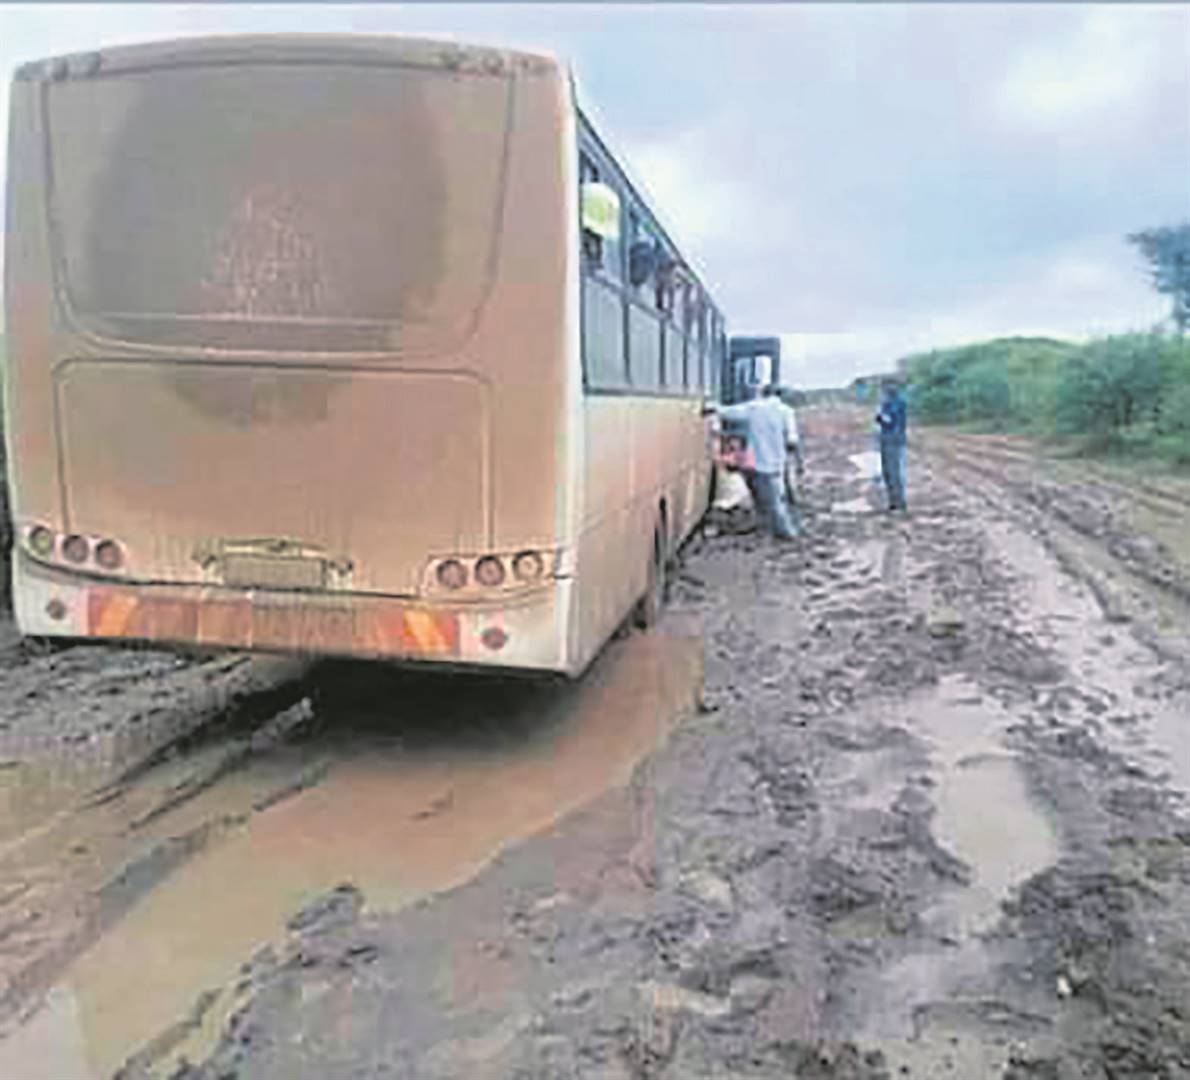 Residents in Moses Kotane Local Municipality want authorities to repair bad roads in the area.